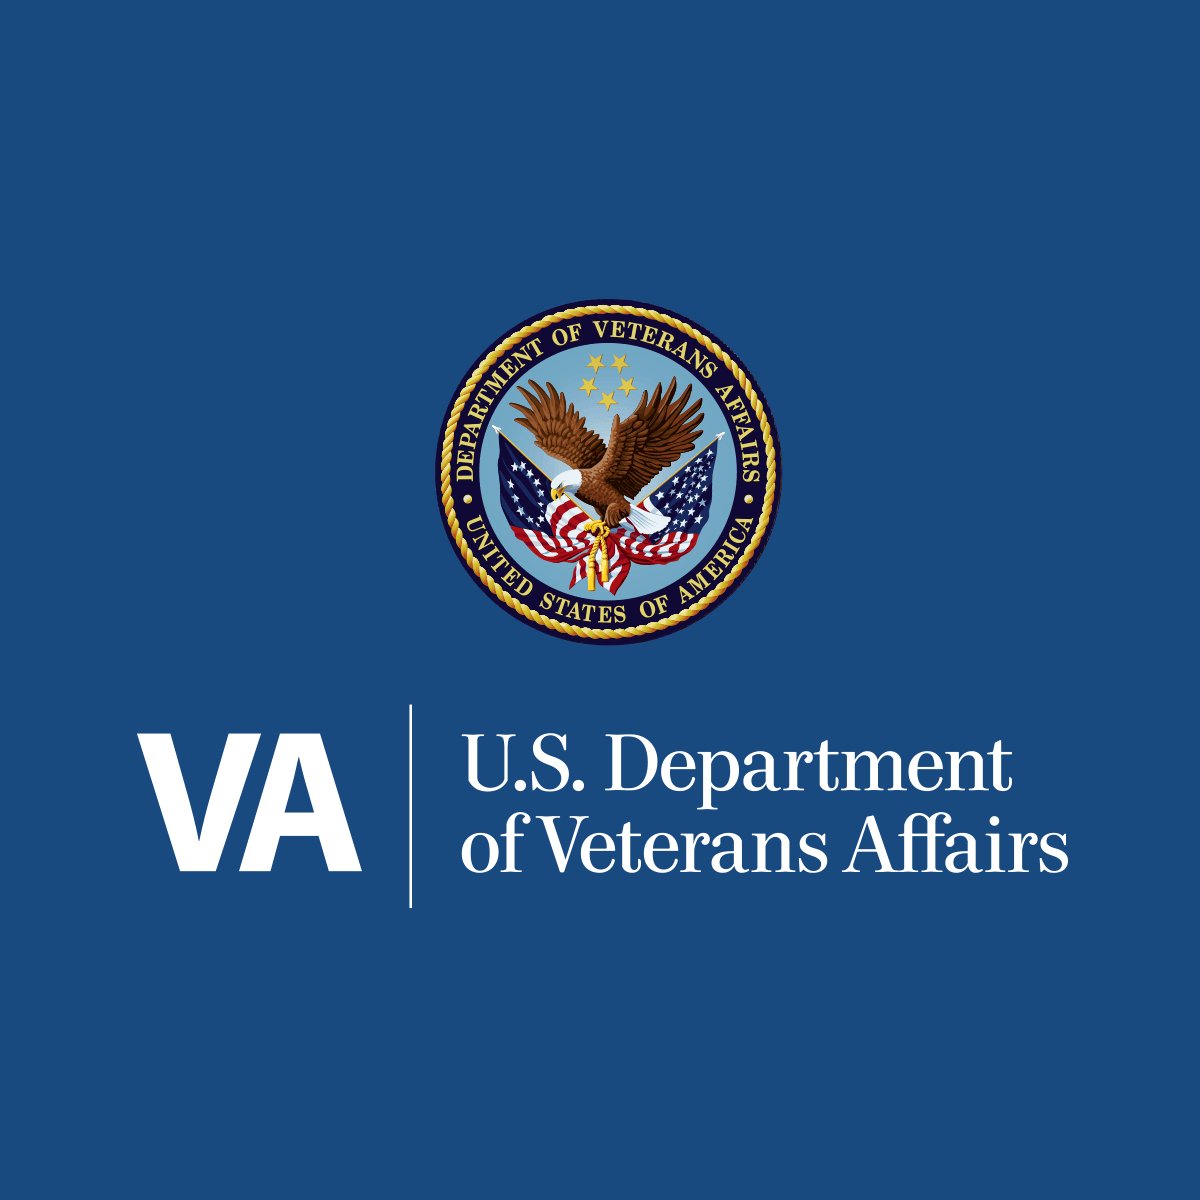 We posted some important information on our Facebook page about Community Care offered through the VA. To learn more, visit facebook.com/RepKatCammack/ to see the eligibility requirements.